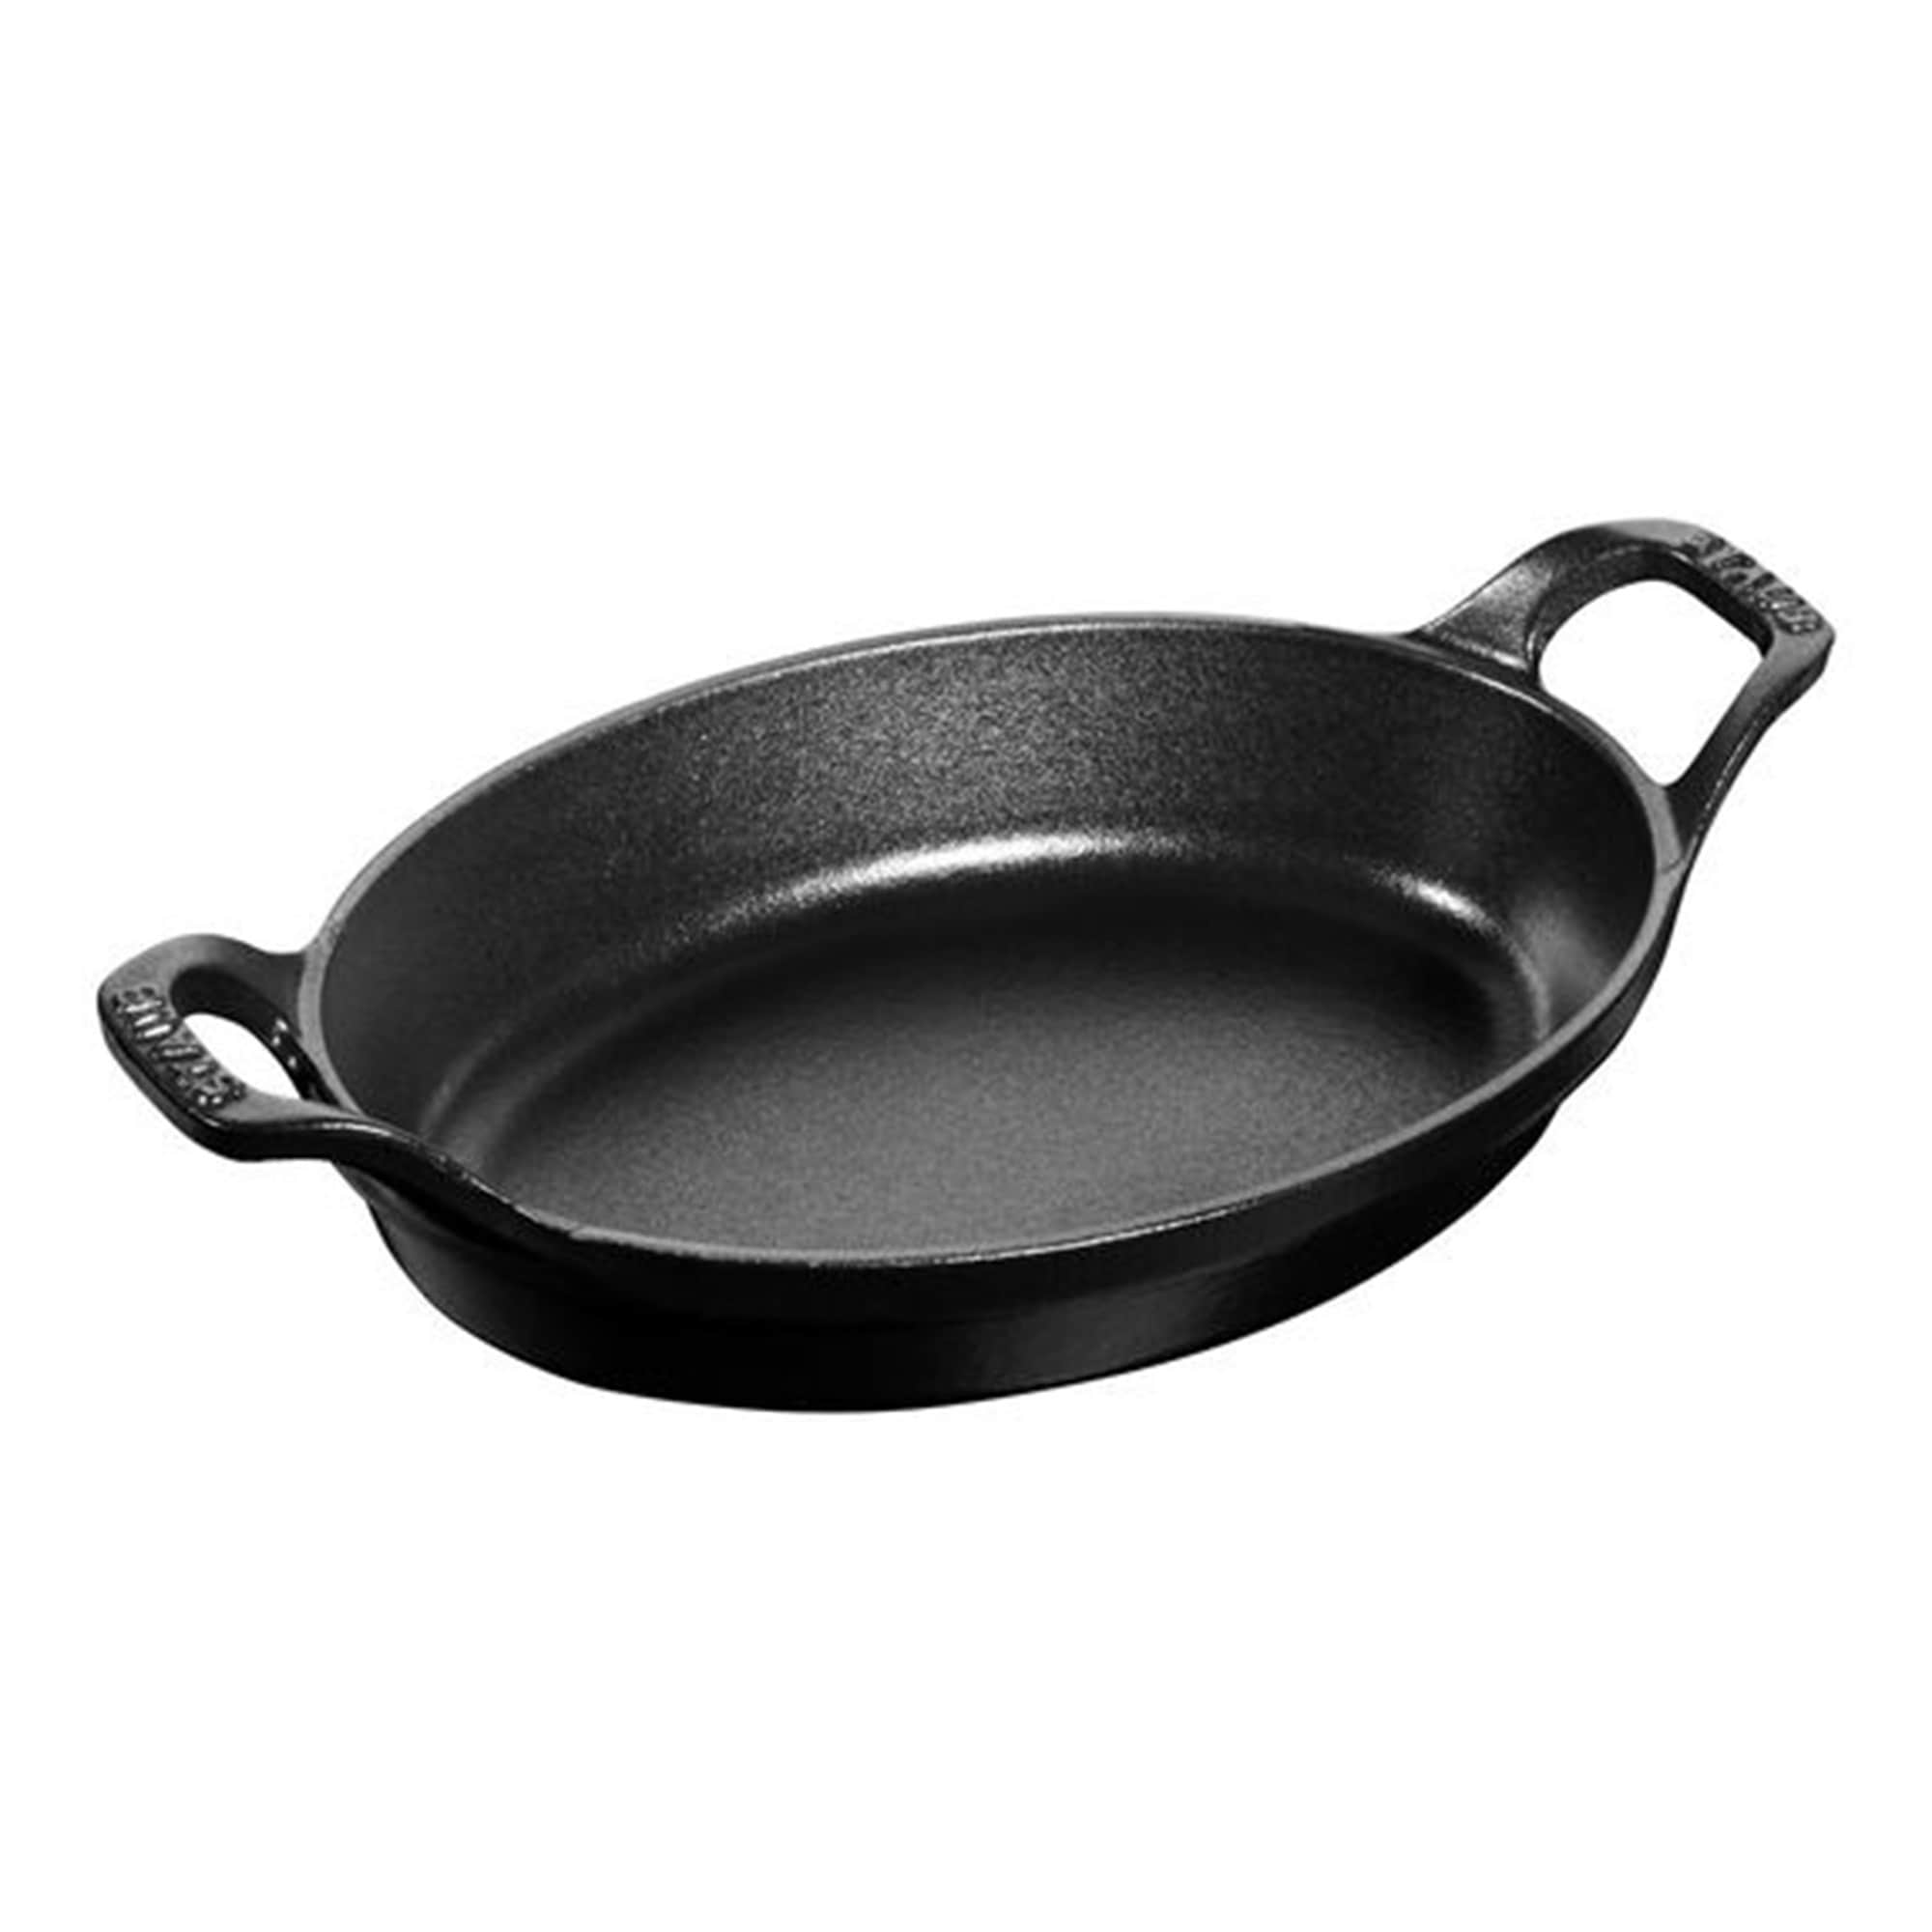 https://ak1.ostkcdn.com/images/products/is/images/direct/e46d0acd2f0e213c9030410c44eea704bb0d9b98/STAUB-Cast-Iron-Oval-Baking-Dish.jpg